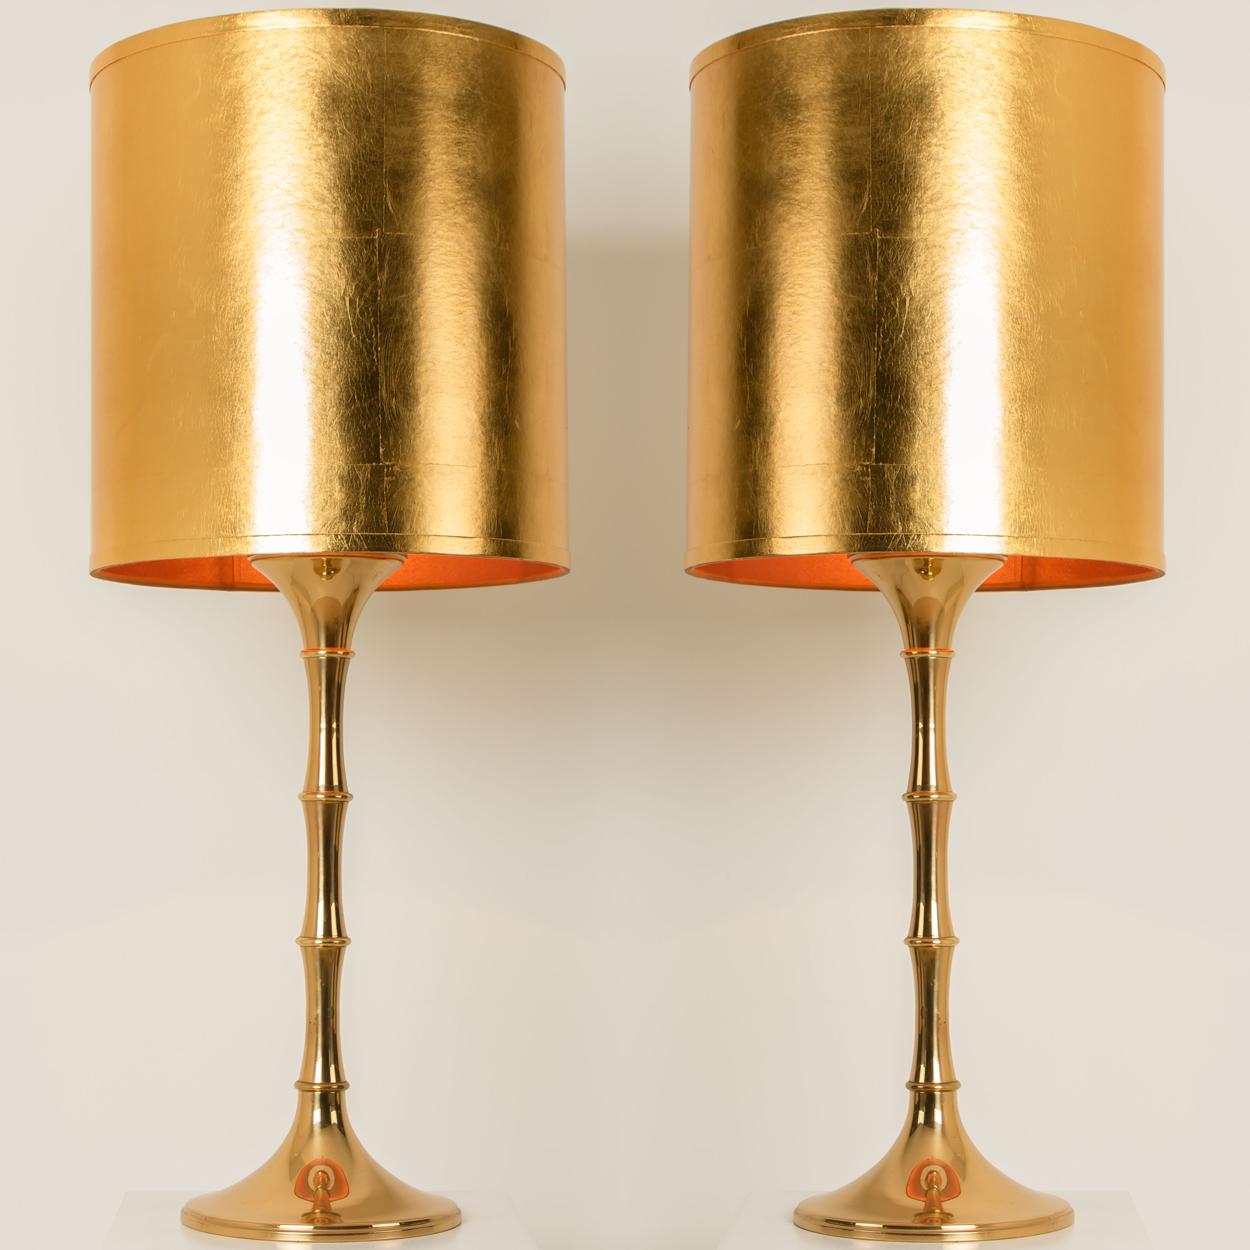 Mid-20th Century Table Lamps Model 'ML 1', Designed by Ingo Maurer, 1968 for Design M